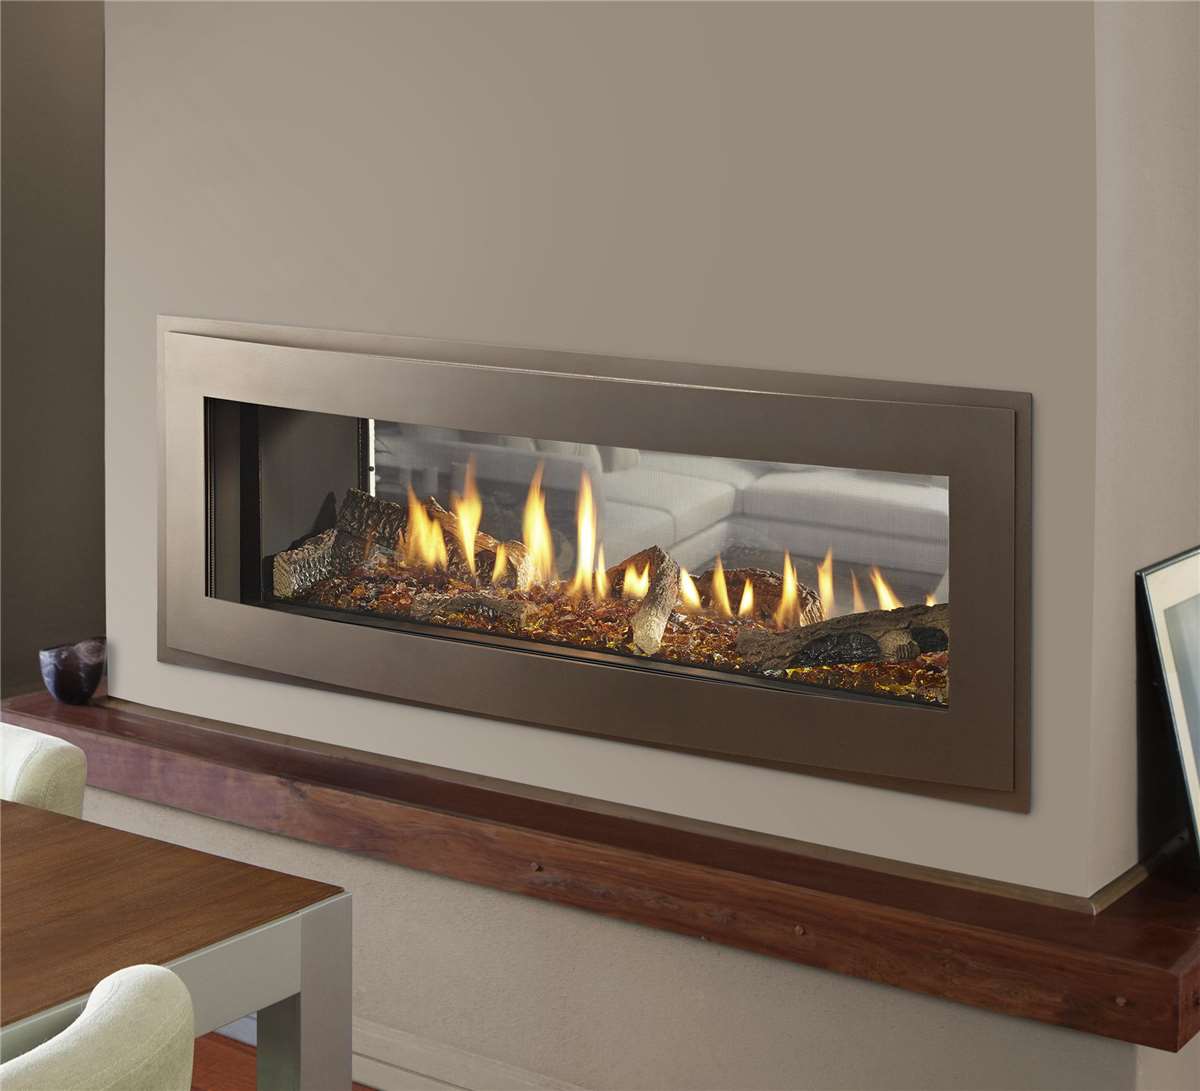 Heatilator Crave 48" see-through gas fireplace with Illusion front and amber glass media.